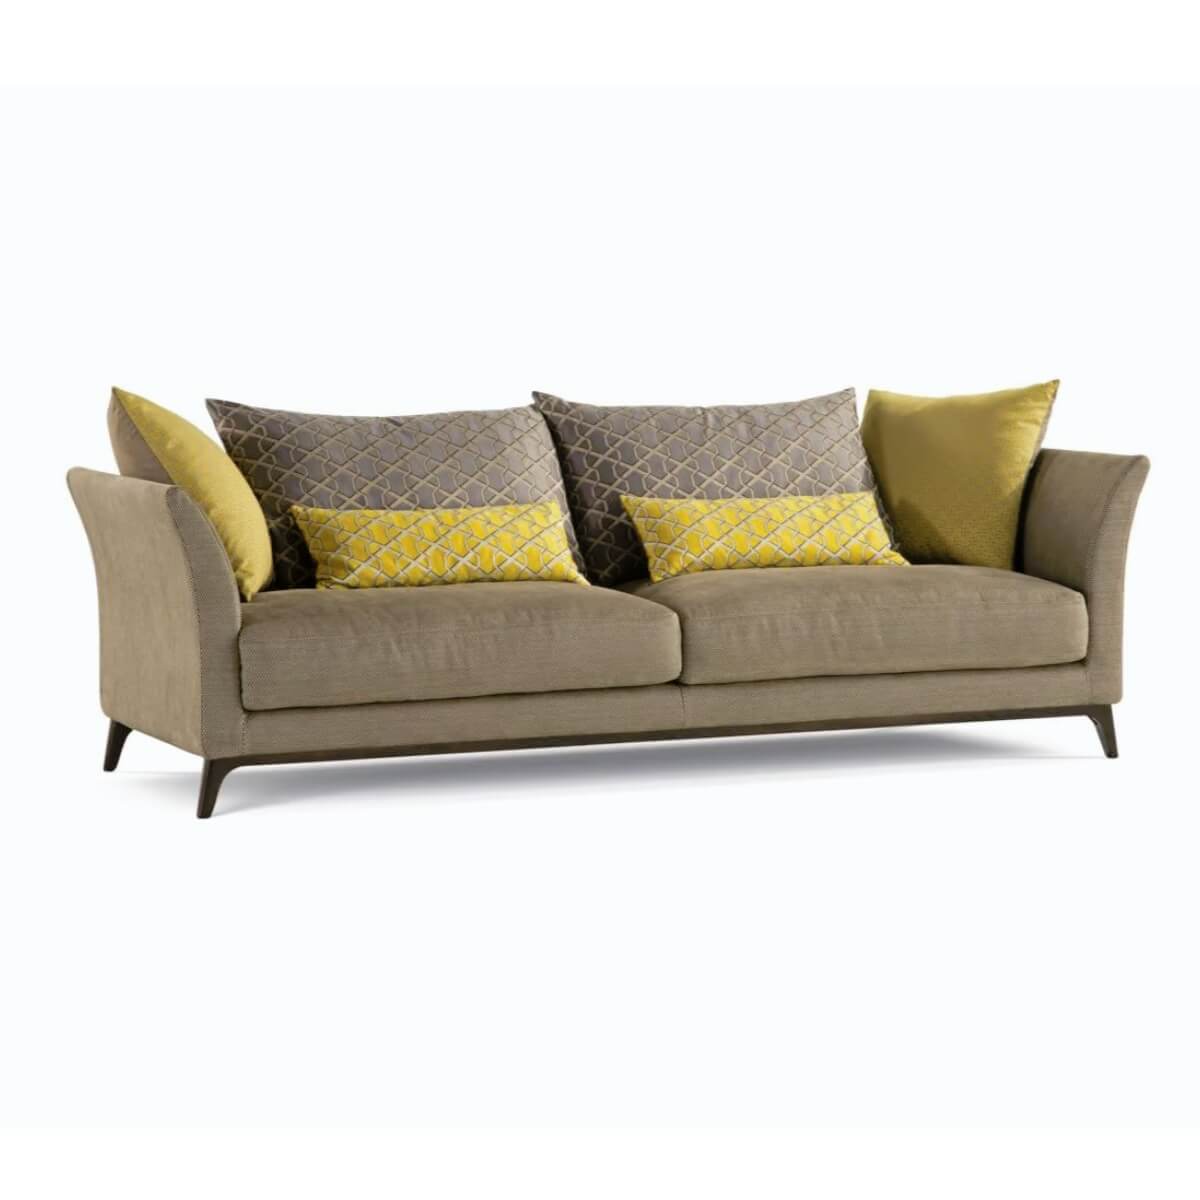 Epic Tranquility Cotton Linen Sofa: A Serene Haven of Tranquility